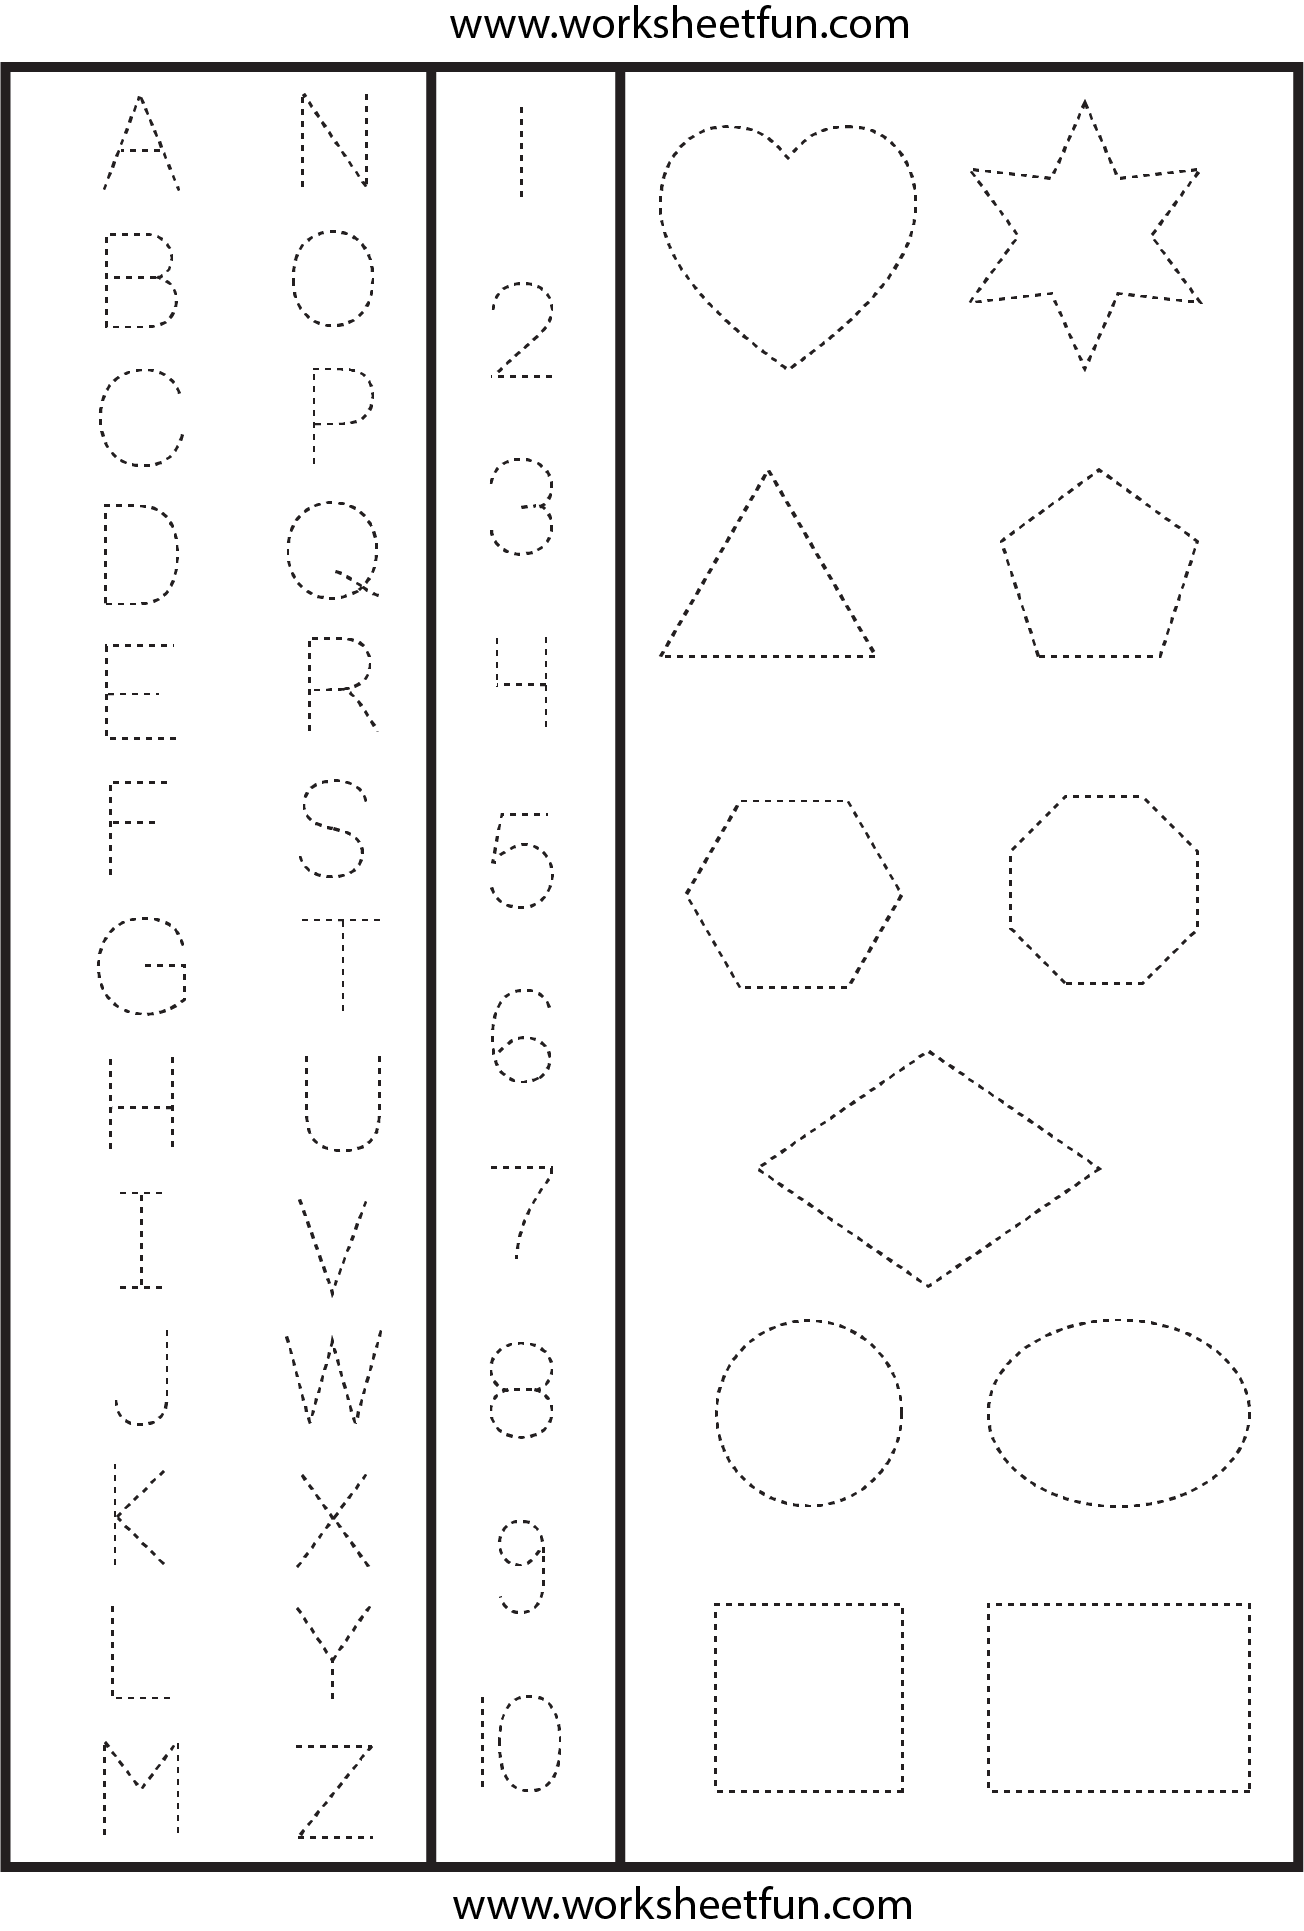 Tracing Letters And Numbers Printable